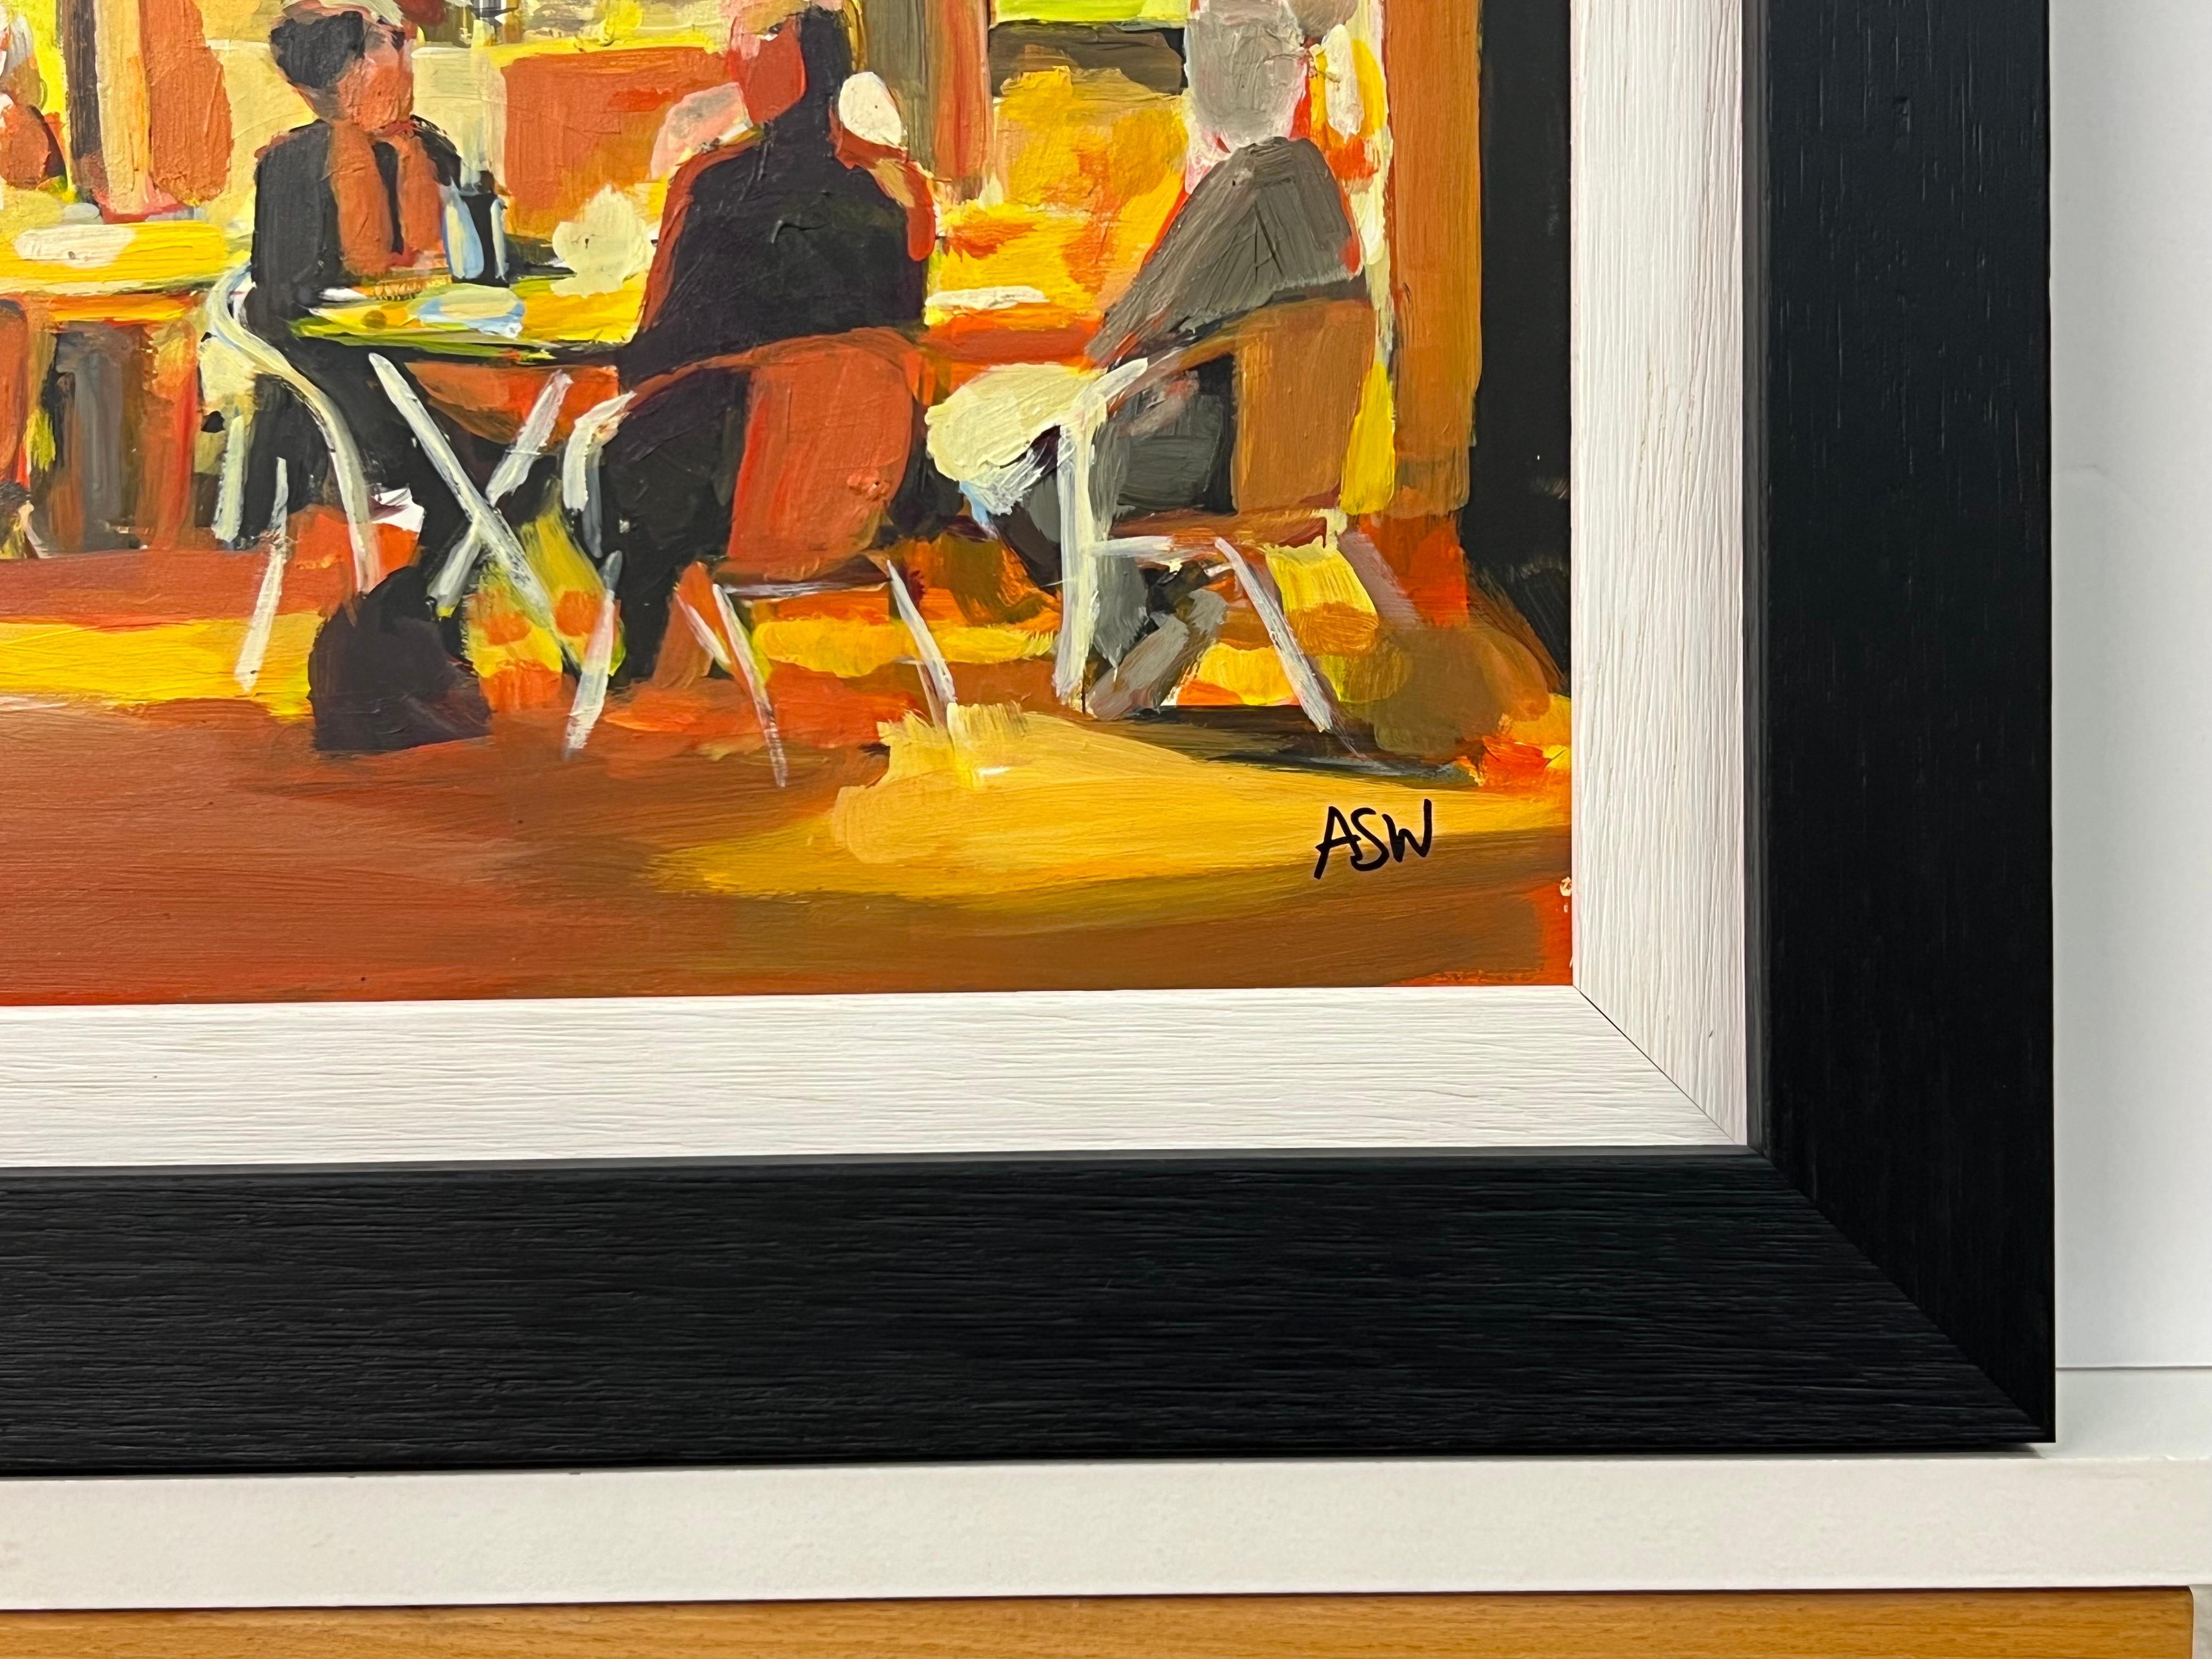 Painting Study of Al Fresco Spanish Tapas Bar Scene at Night by leading British Landscape Artist, Angela Wakefield.

Art measures 12 x 12 inches
Frame measure 16 x 16 inches

Angela Wakefield has twice been on the front cover of ‘Art of England’ and